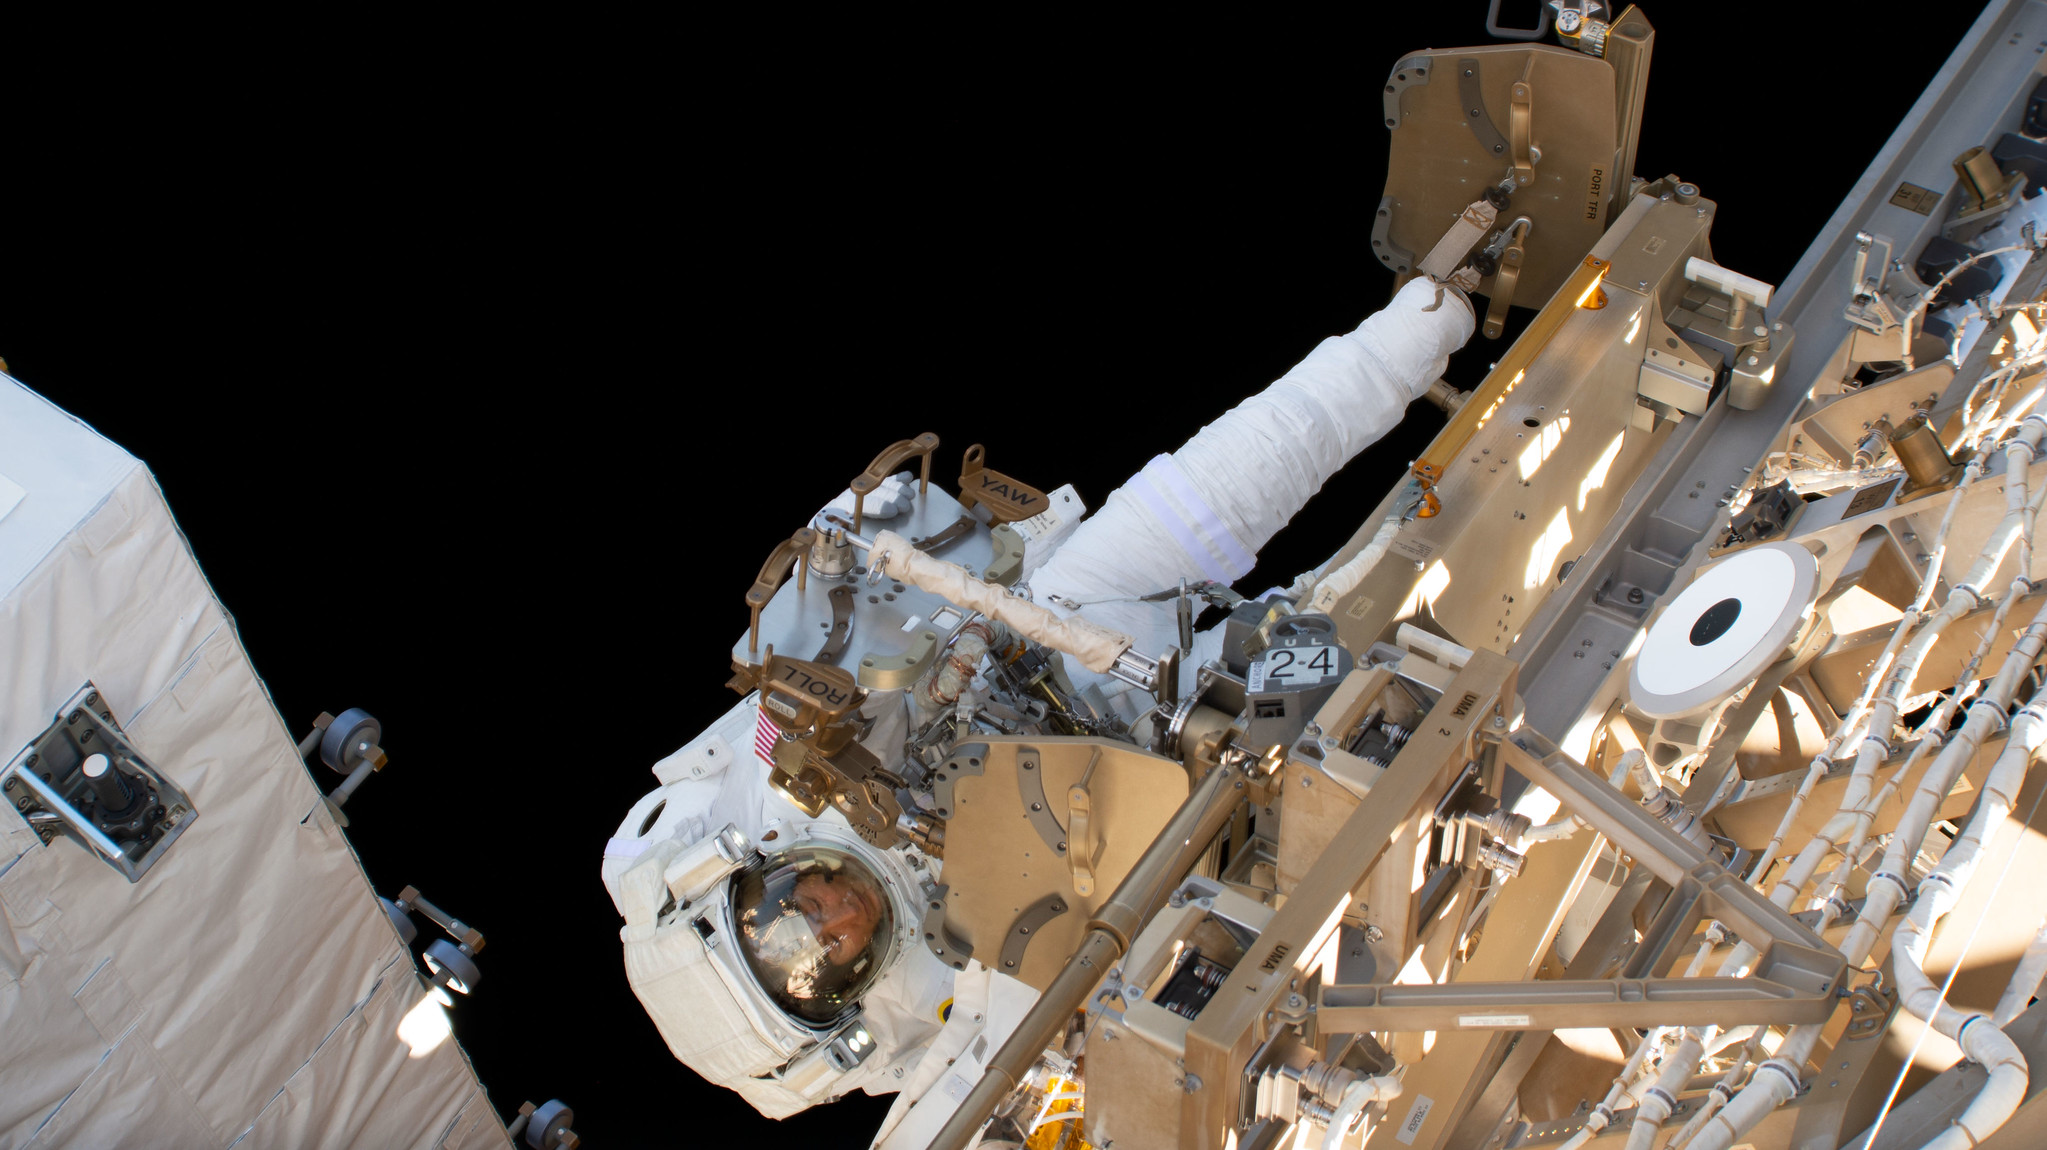 International Space Station astronauts are gearing up to perform 10 spacewalks in coming weeks